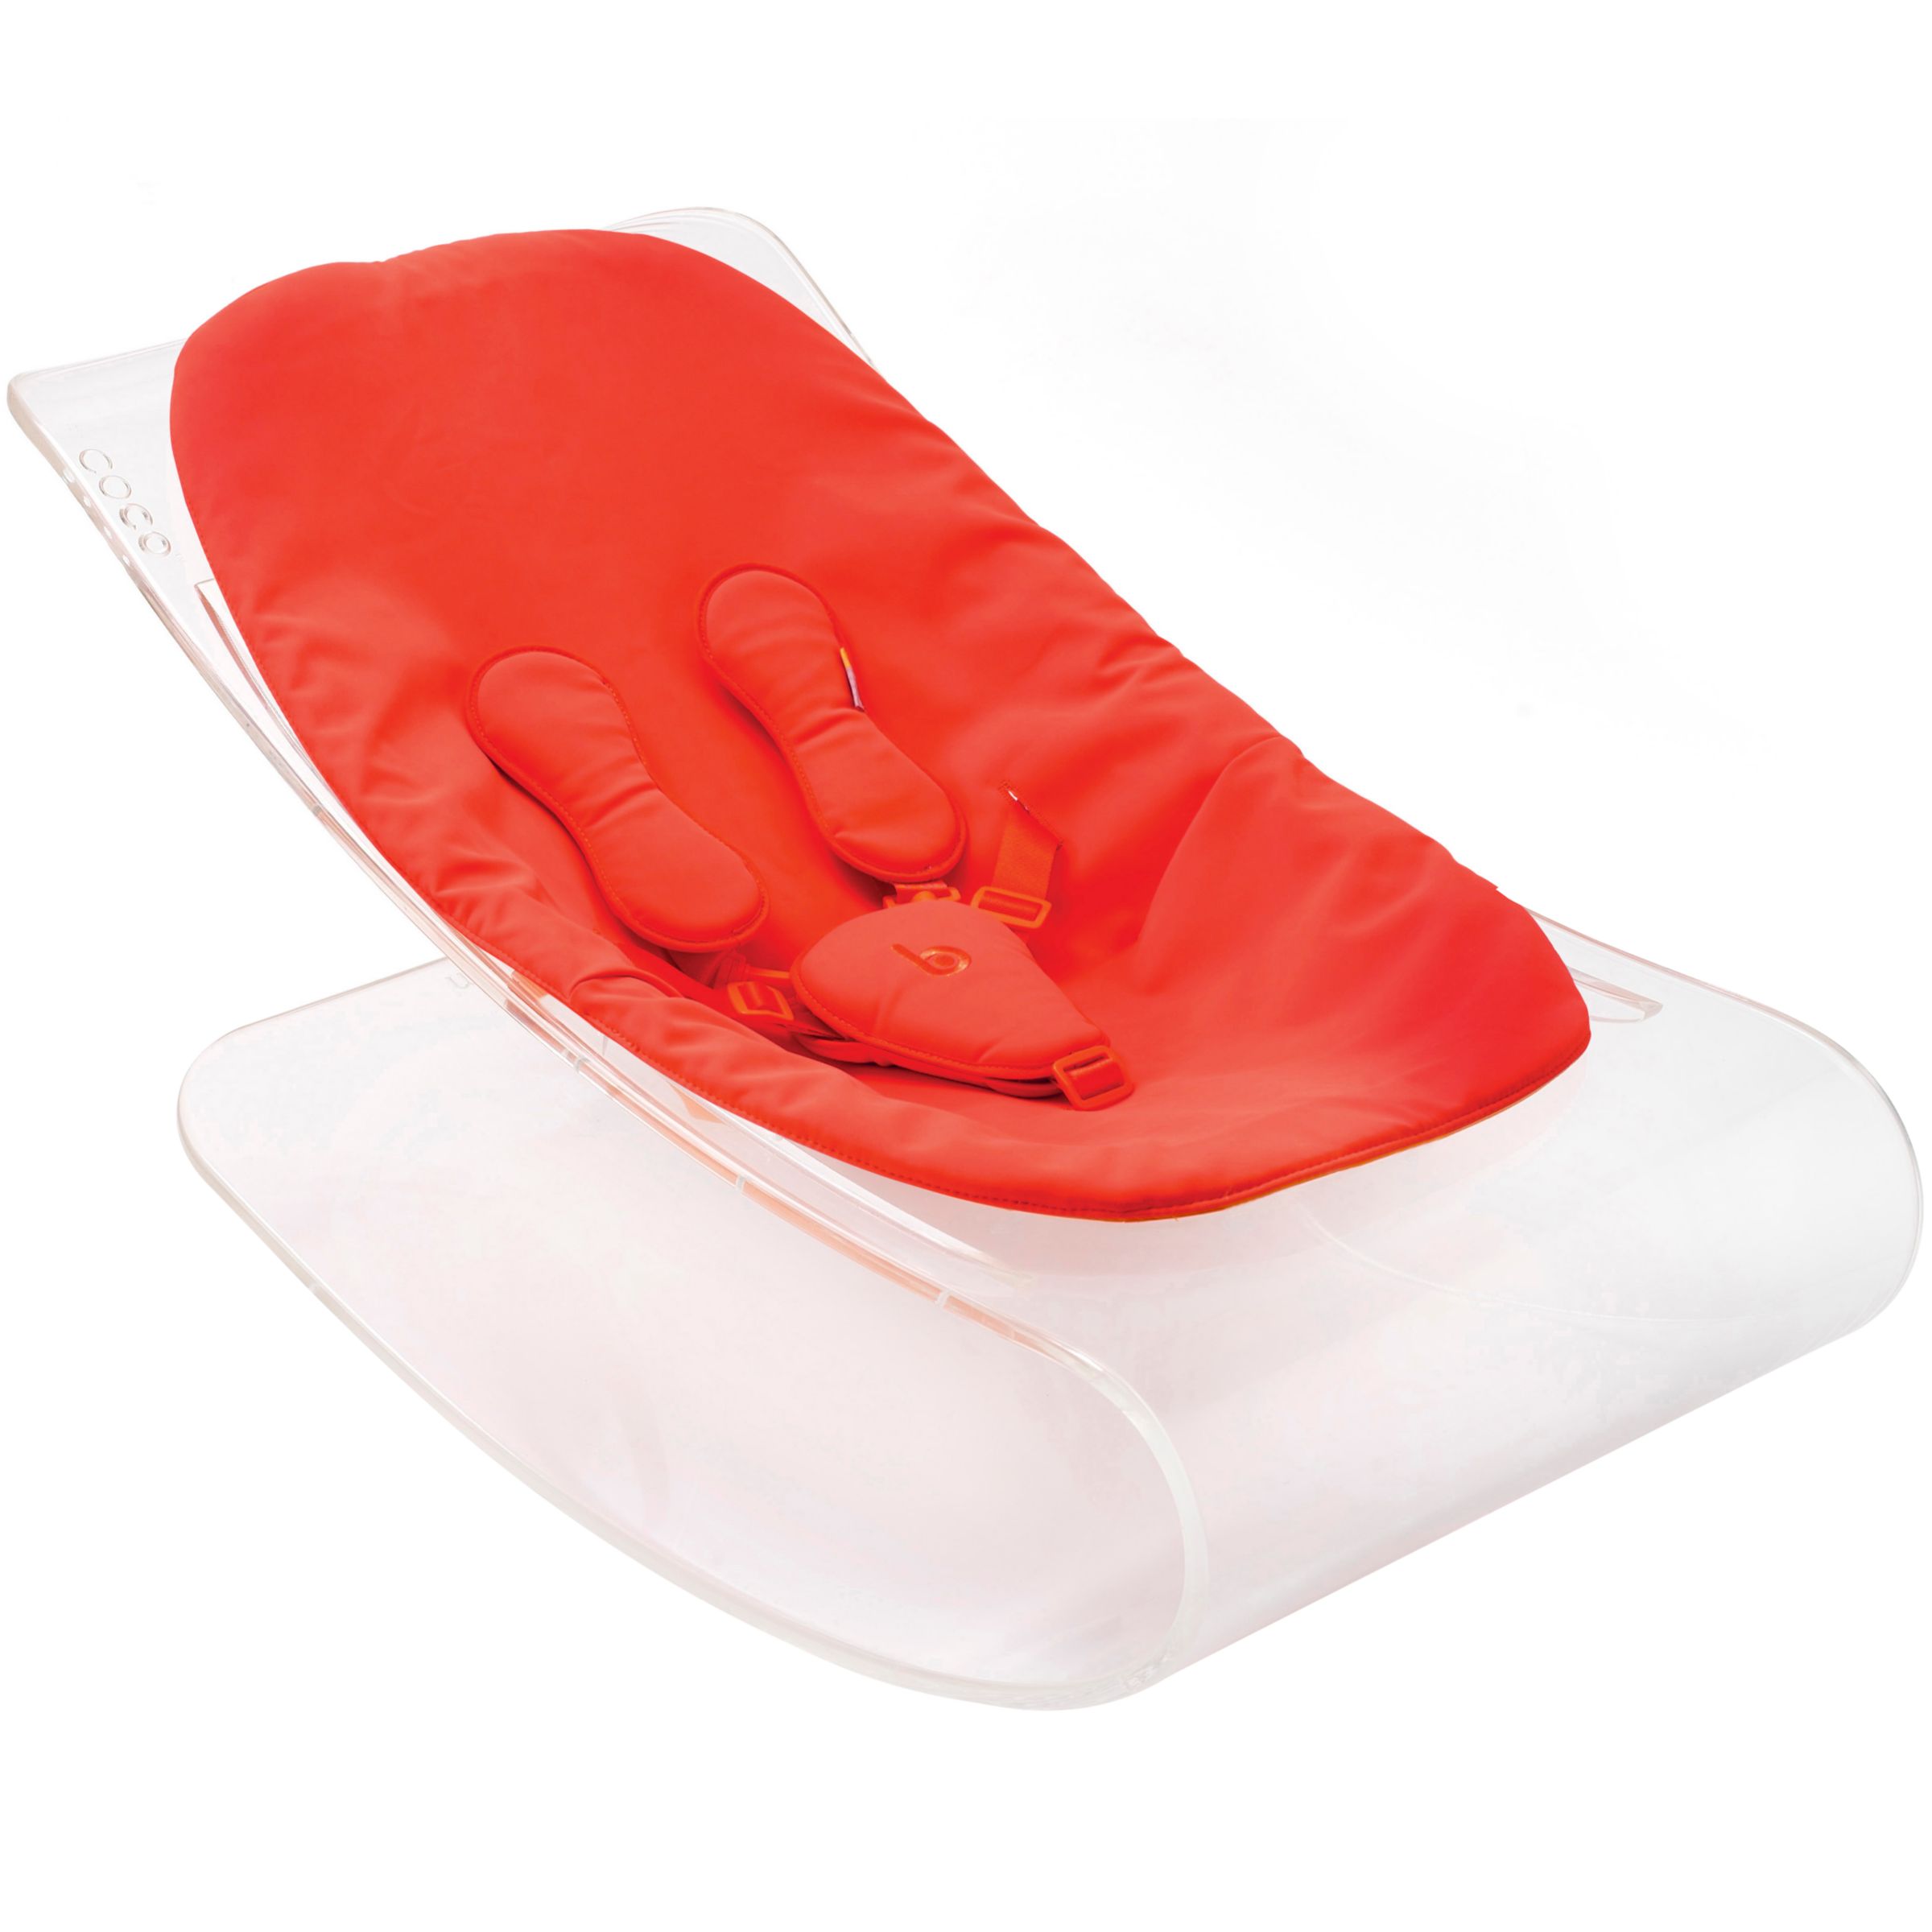 bloom Coco Plexistyle Baby Lounger, Transparent with Rock Red at John Lewis